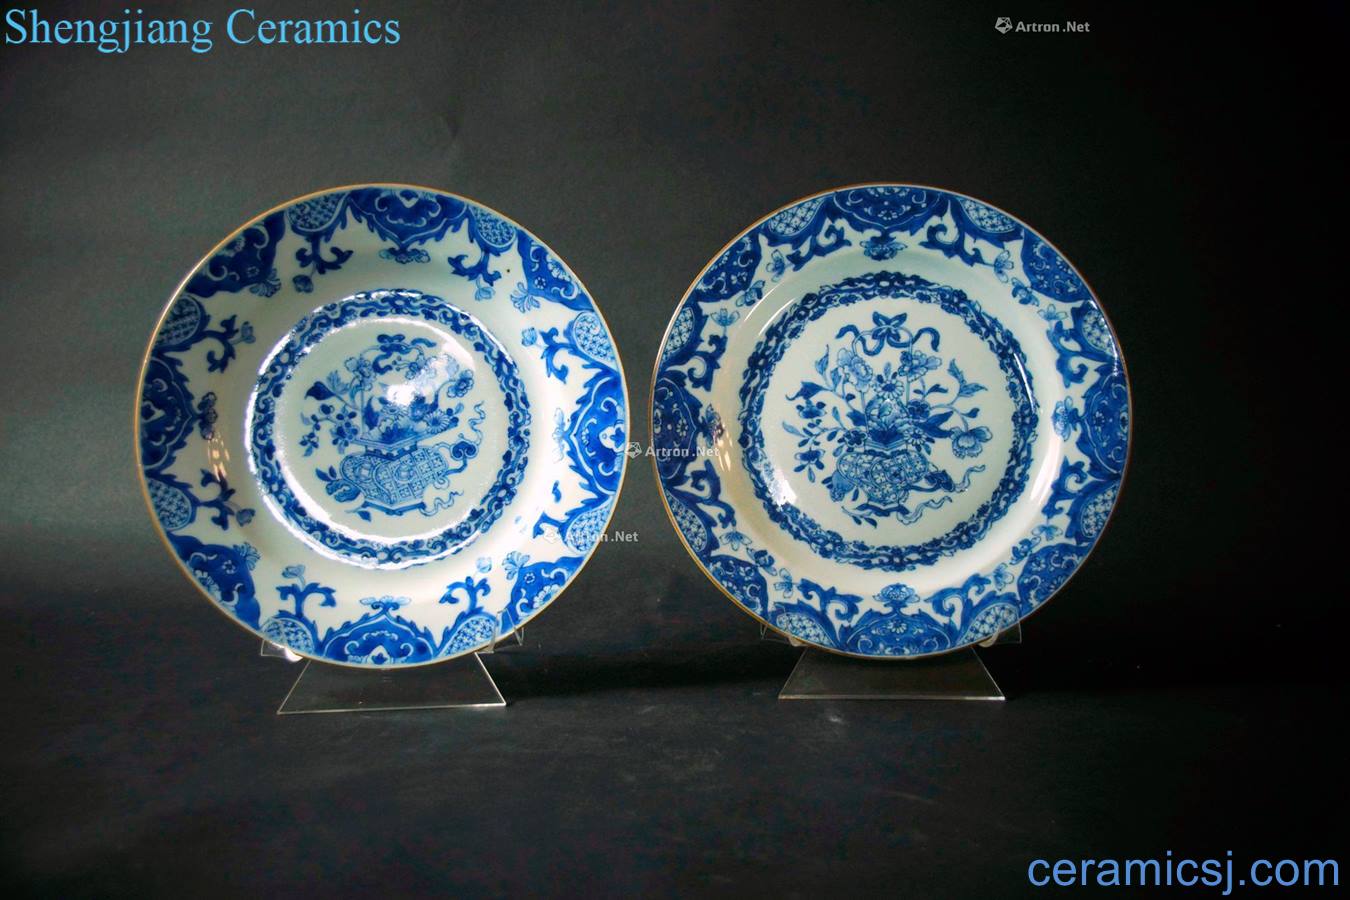 In the 18th century porcelain plate (a)